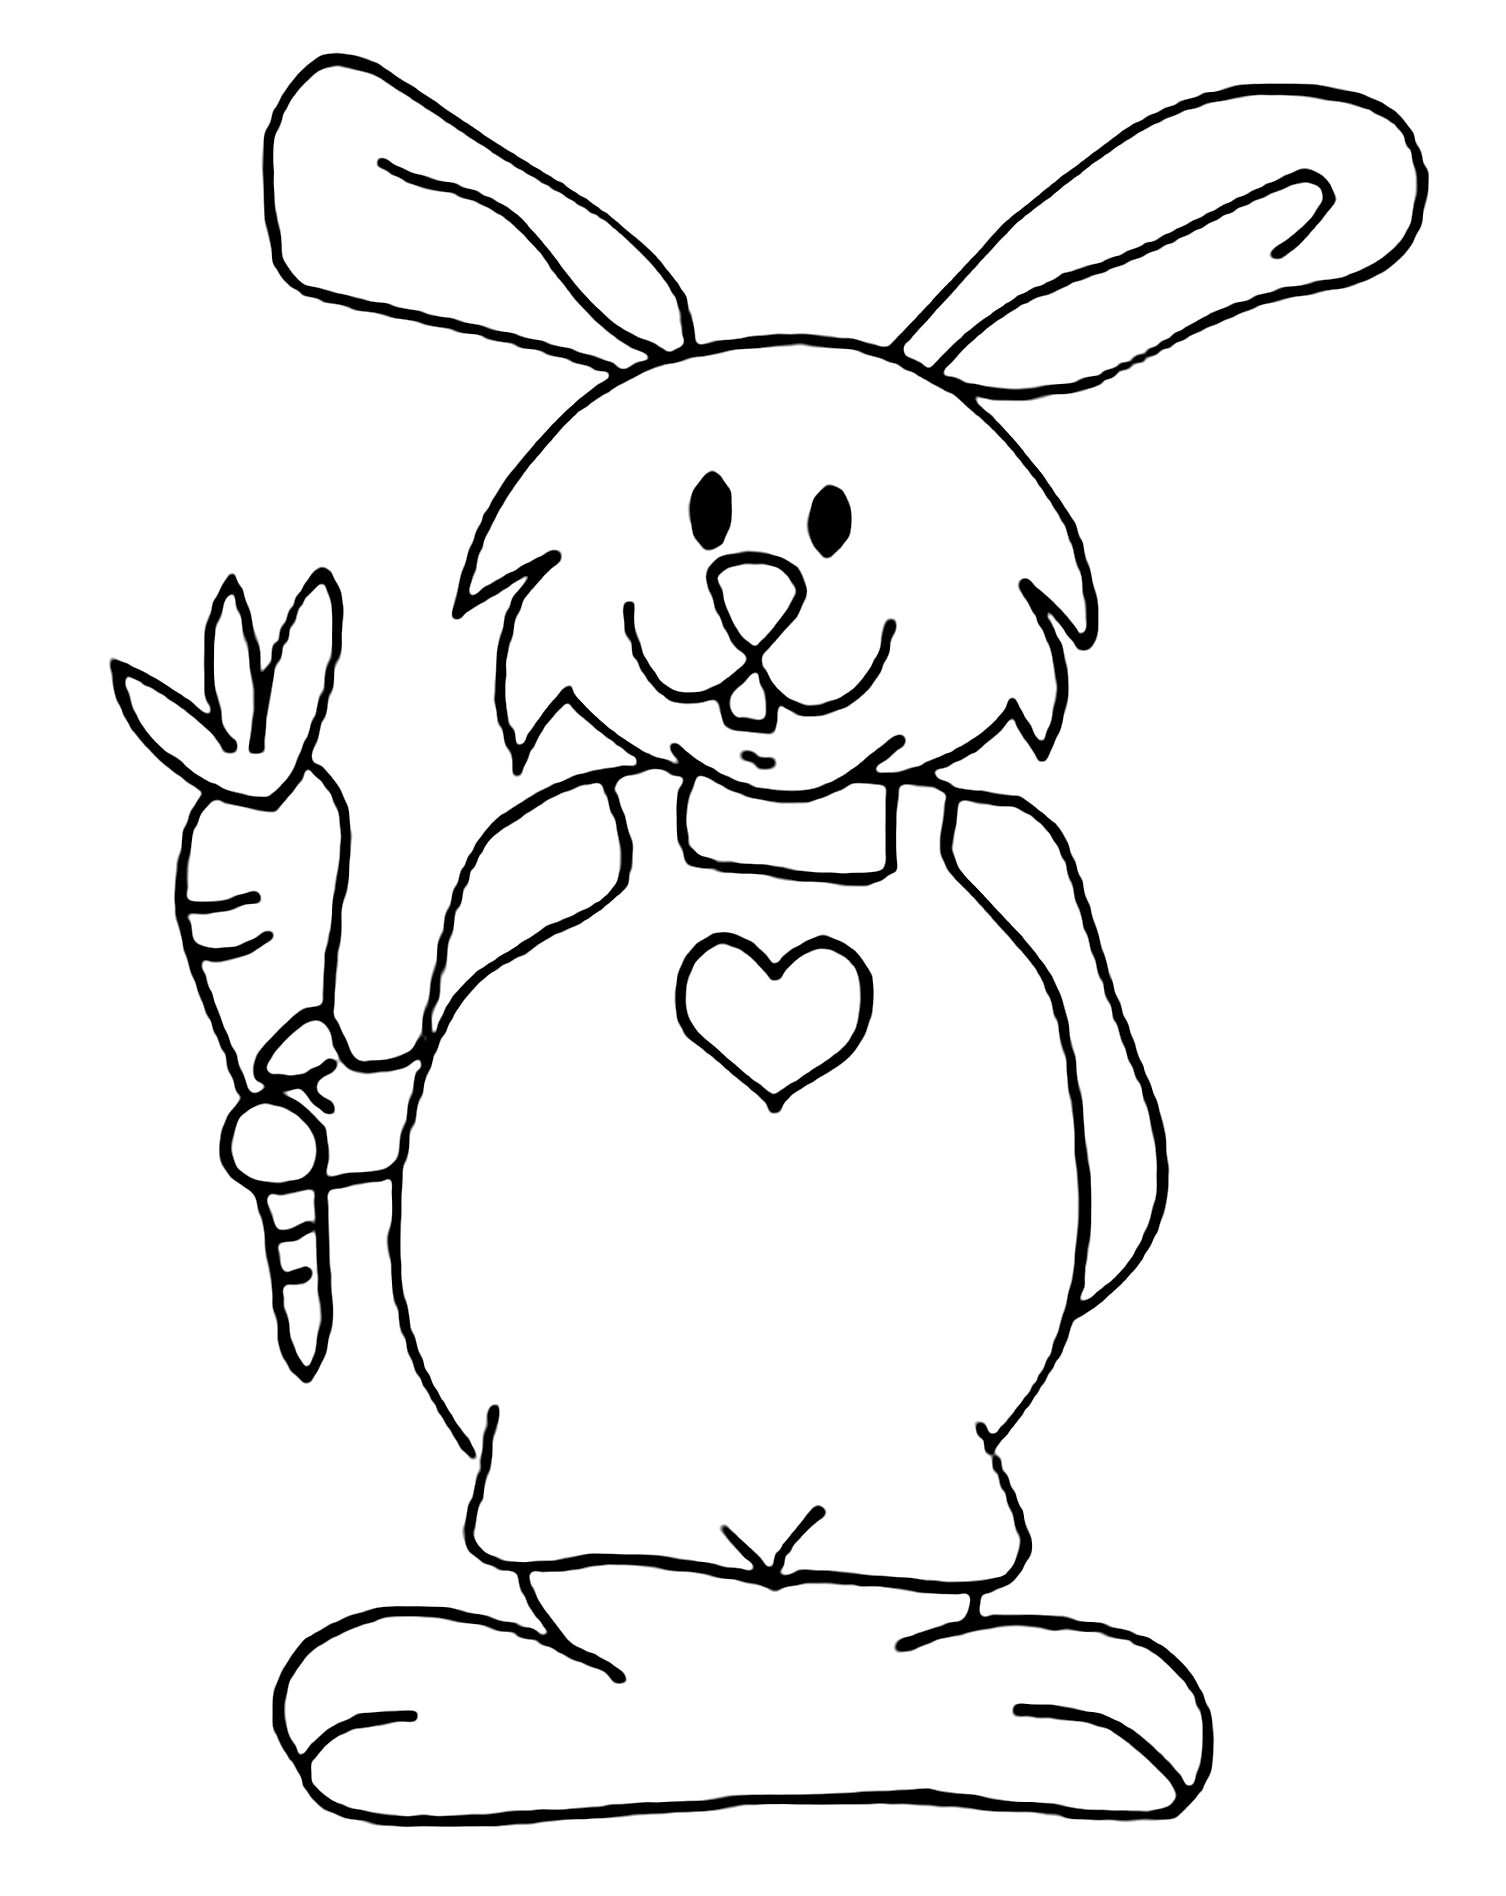 free-rabbit-coloring-pages-to-print-rabbits-bunnies-kids-coloring-pages